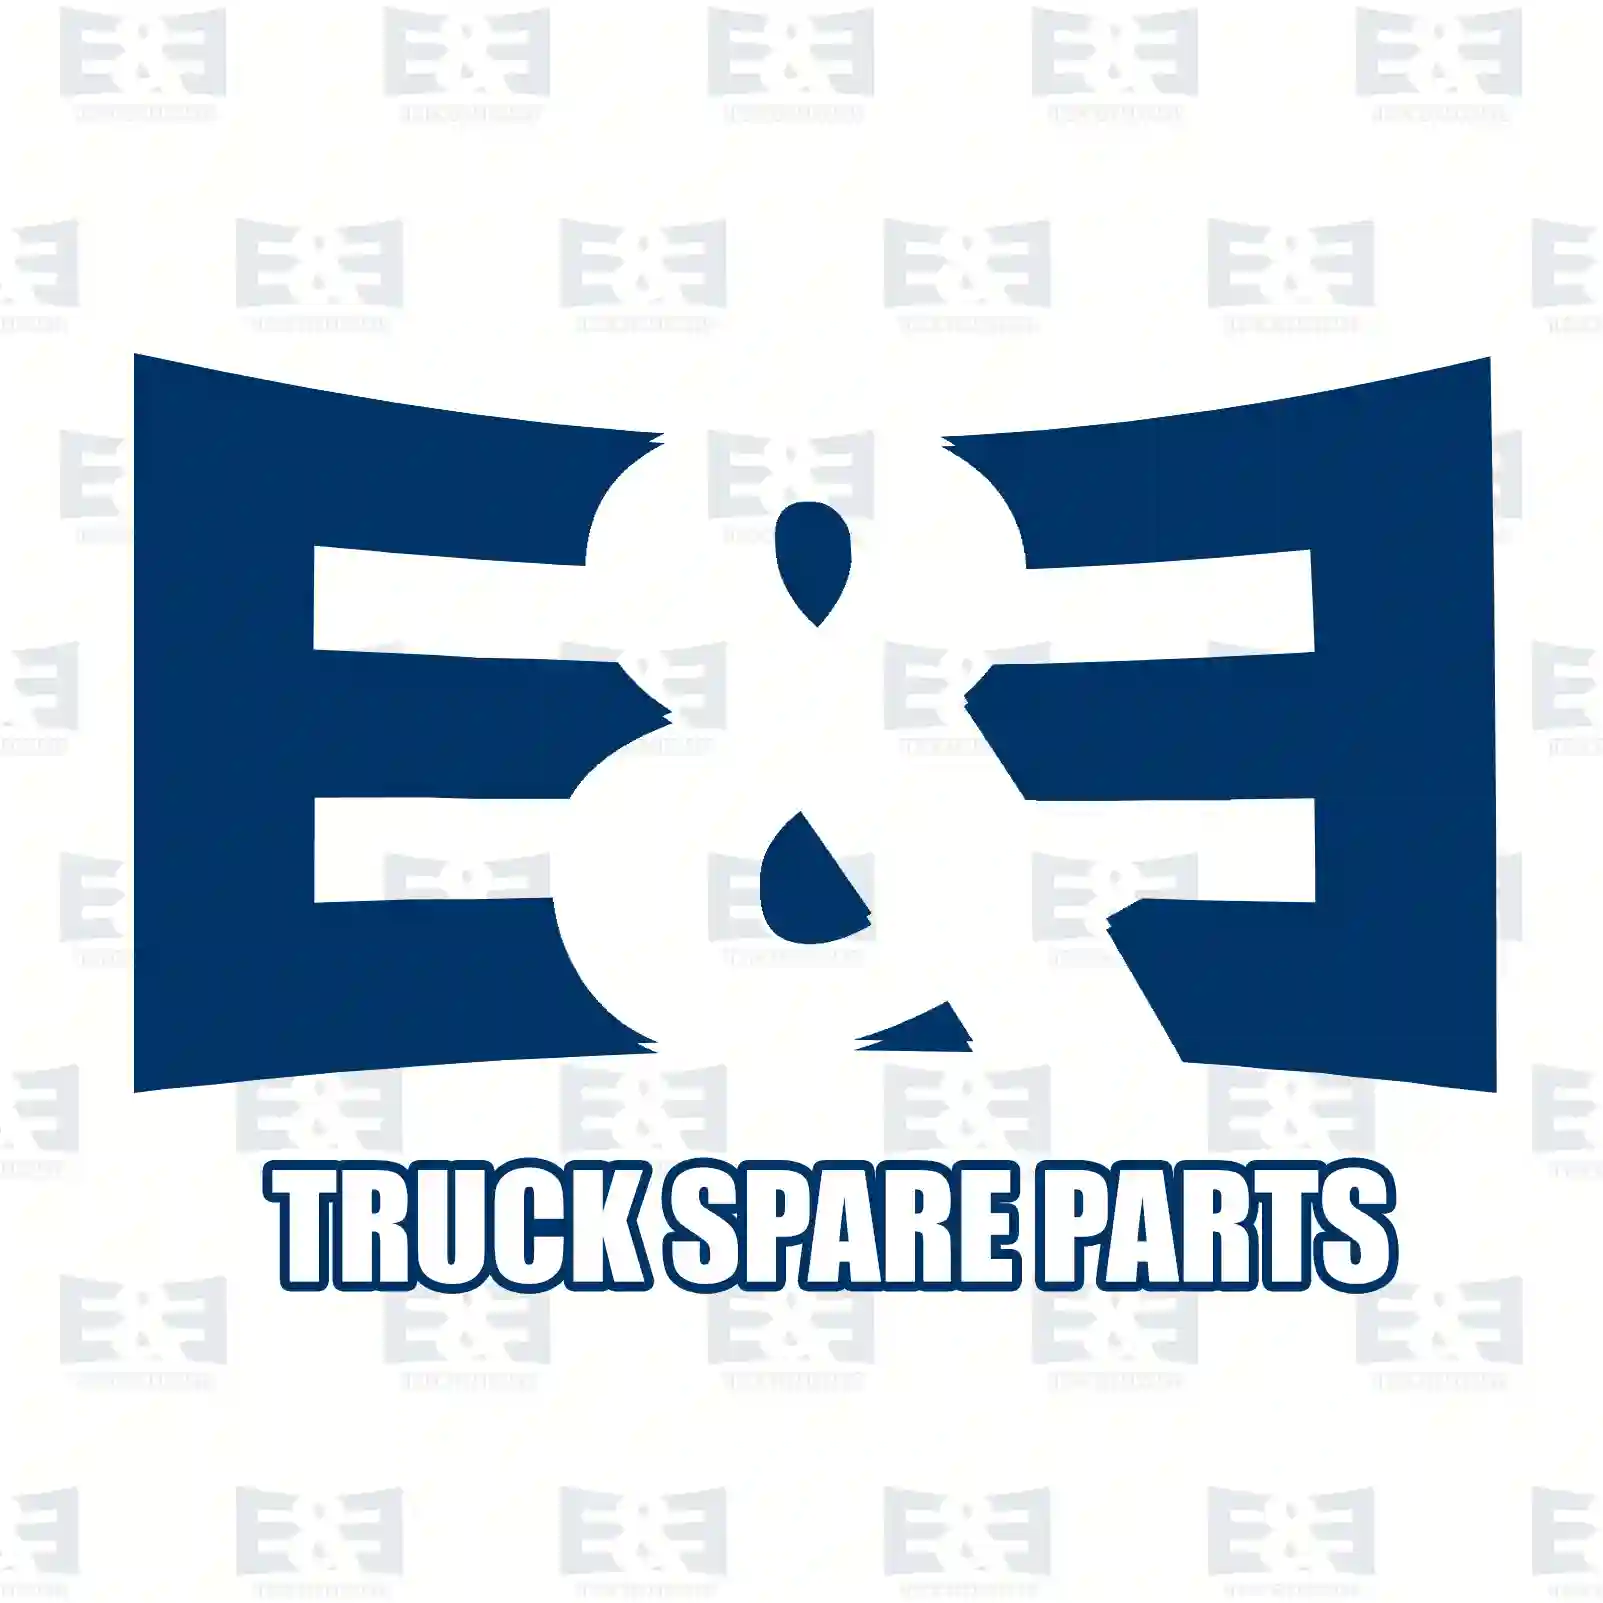 Gasket, planetary gear cylinder, 2E2277885, 1530298, 2108947, ZG30504-0008 ||  2E2277885 E&E Truck Spare Parts | Truck Spare Parts, Auotomotive Spare Parts Gasket, planetary gear cylinder, 2E2277885, 1530298, 2108947, ZG30504-0008 ||  2E2277885 E&E Truck Spare Parts | Truck Spare Parts, Auotomotive Spare Parts